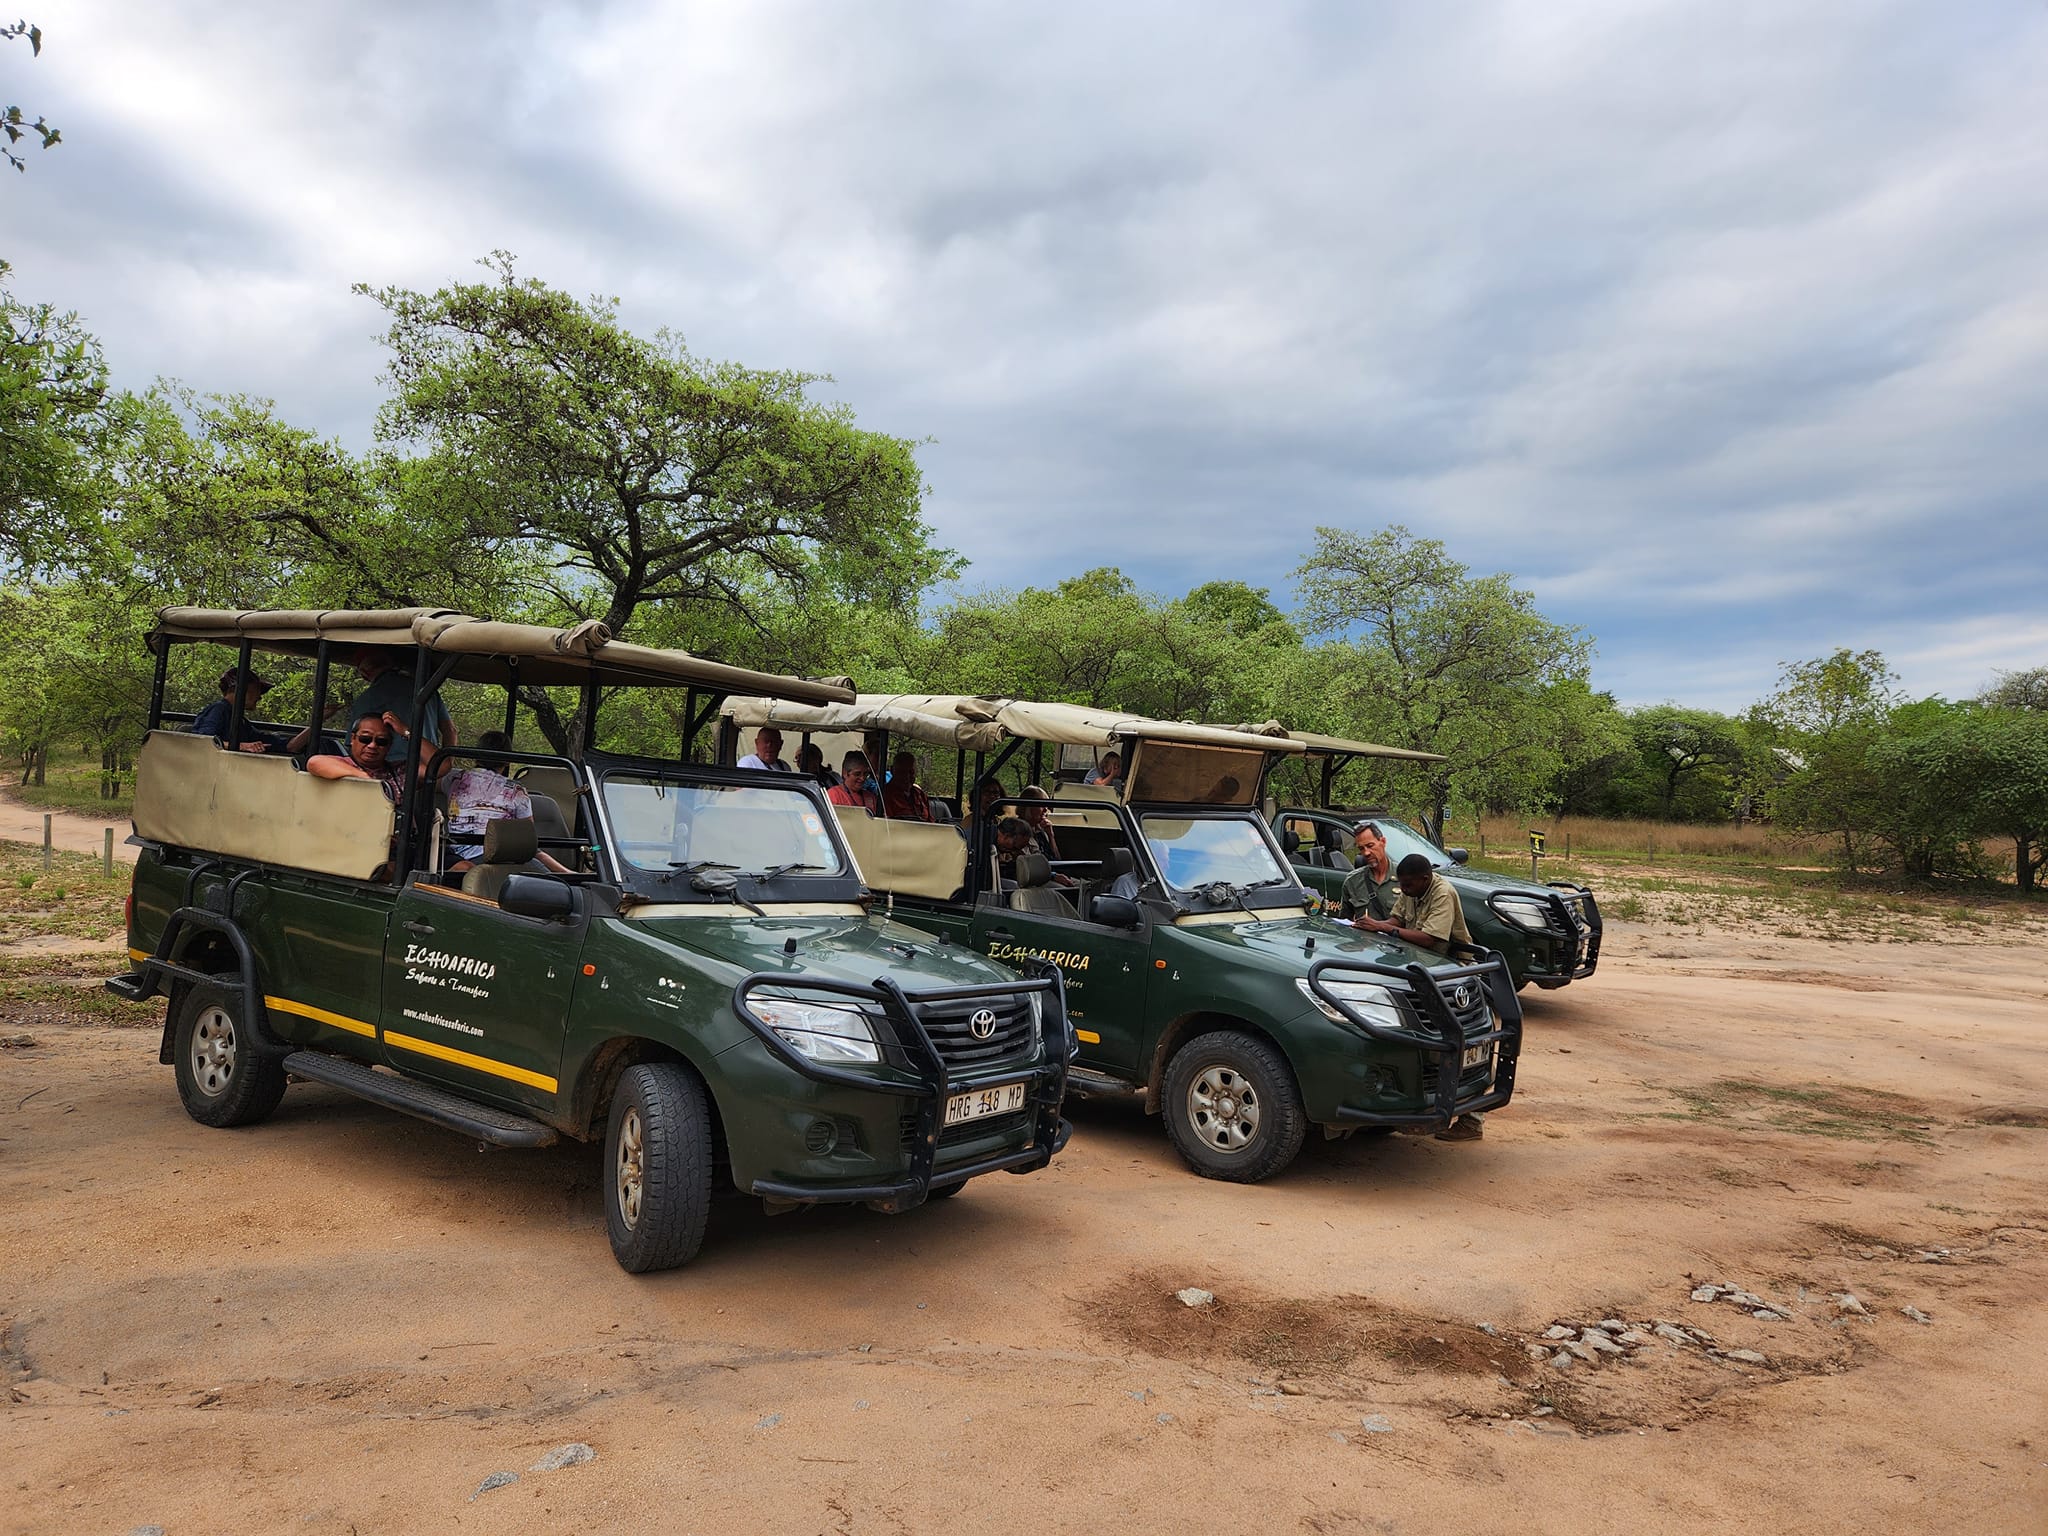 4x4s lined up in private game reserve Day 12, South Africa & Victoria Falls Approach Tour